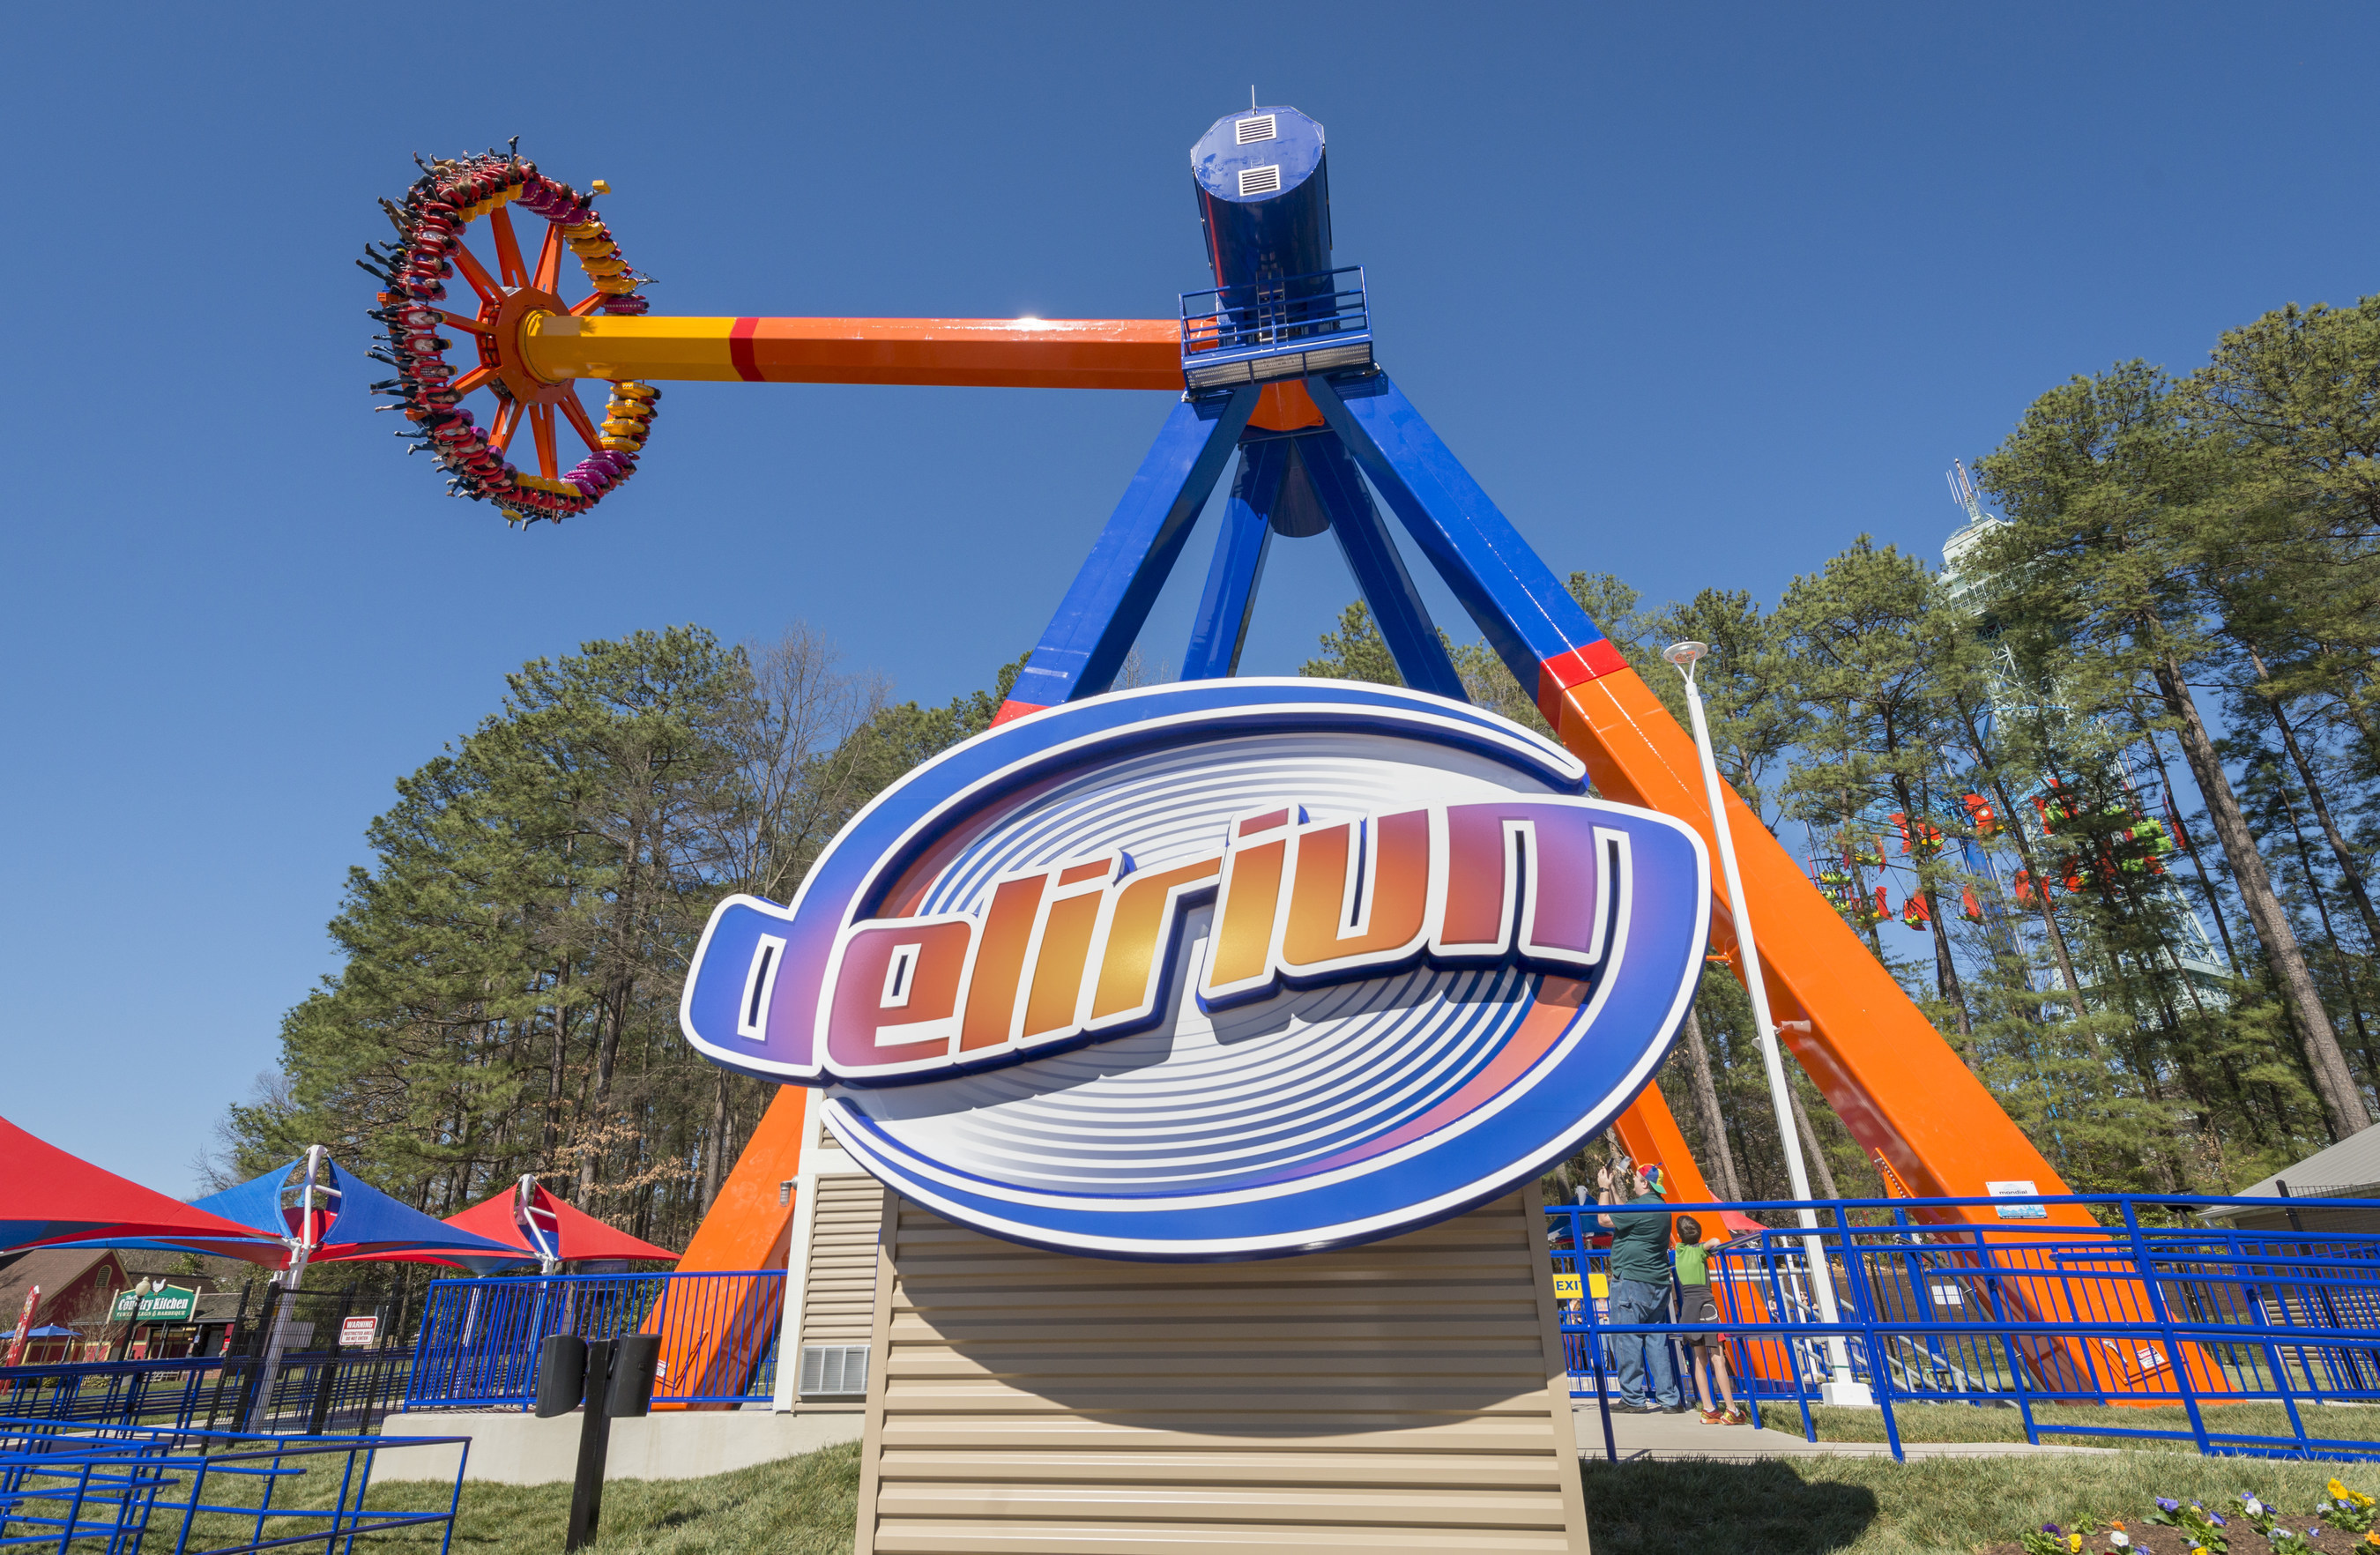 Delirium will have riders spinning and soaring through Candy Apple Grove